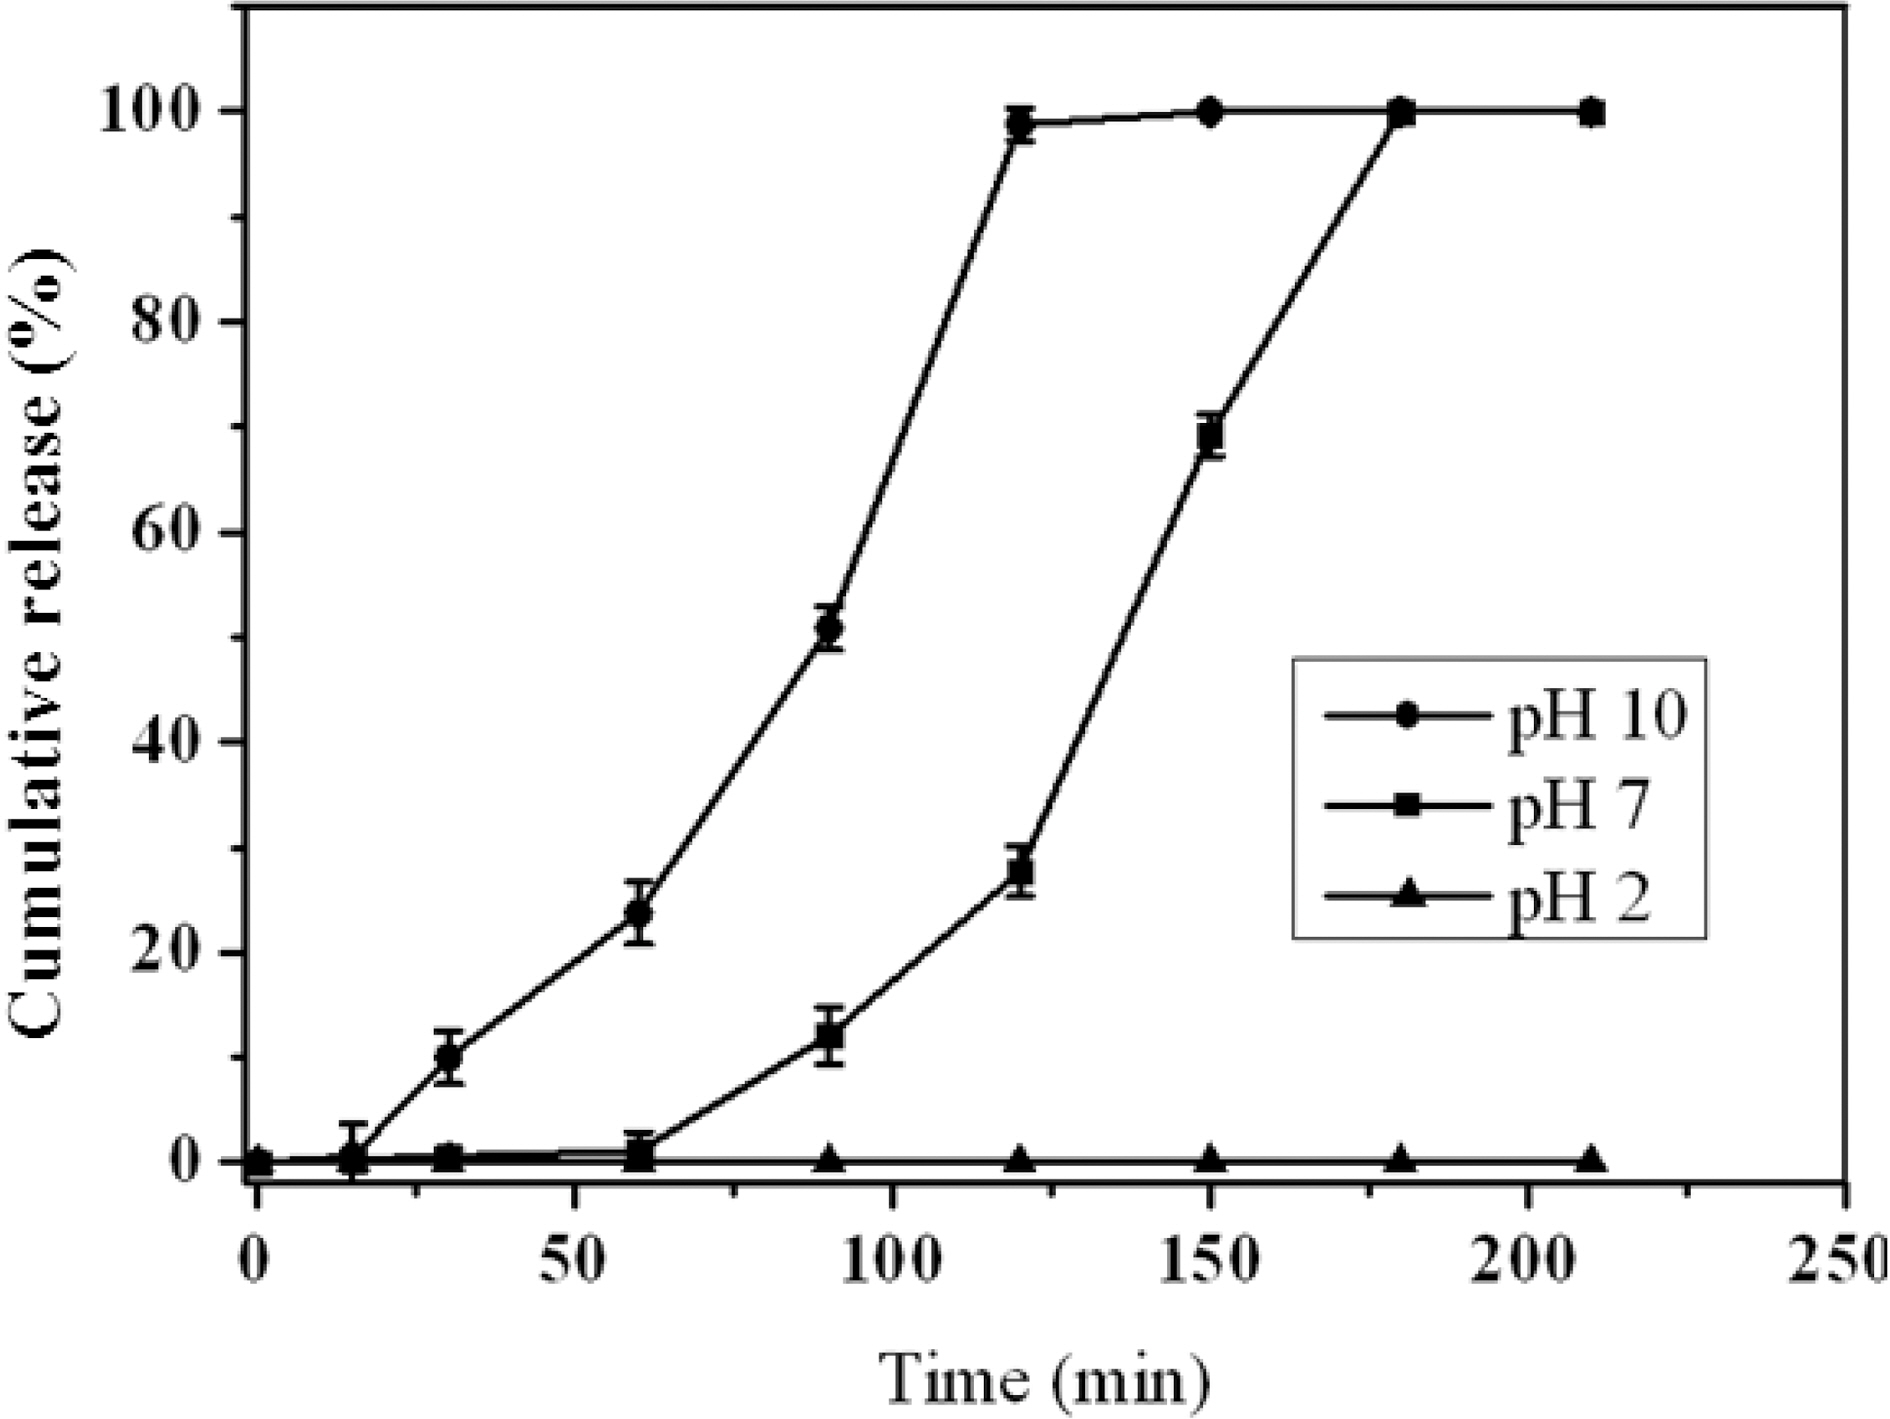 pH-sensitive release behavior of the alginate/AC composite hydrogel magnetic beads containing VB12 at several different pHs.